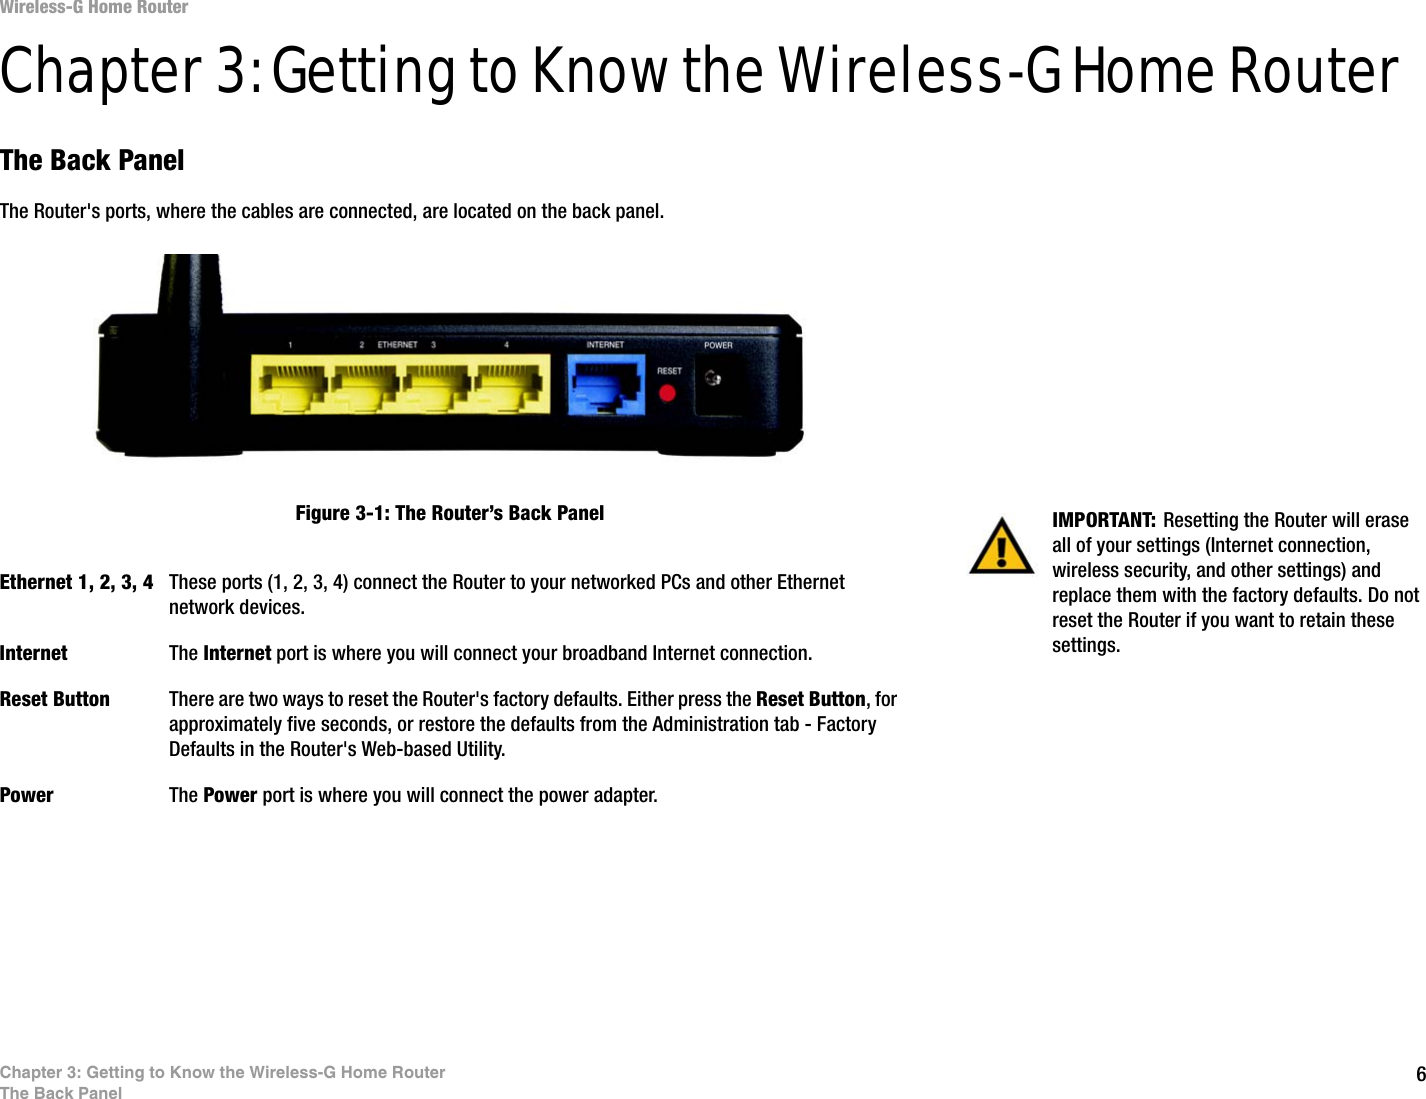 6Chapter 3: Getting to Know the Wireless-G Home RouterThe Back PanelWireless-G Home RouterChapter 3: Getting to Know the Wireless-G Home RouterThe Back PanelThe Router&apos;s ports, where the cables are connected, are located on the back panel.Ethernet 1, 2, 3, 4 These ports (1, 2, 3, 4) connect the Router to your networked PCs and other Ethernet network devices.Internet The Internet port is where you will connect your broadband Internet connection.Reset Button There are two ways to reset the Router&apos;s factory defaults. Either press the Reset Button, for approximately five seconds, or restore the defaults from the Administration tab - Factory Defaults in the Router&apos;s Web-based Utility.Power The Power port is where you will connect the power adapter.IMPORTANT: Resetting the Router will erase all of your settings (Internet connection, wireless security, and other settings) and replace them with the factory defaults. Do not reset the Router if you want to retain these settings.Figure 3-1: The Router’s Back Panel